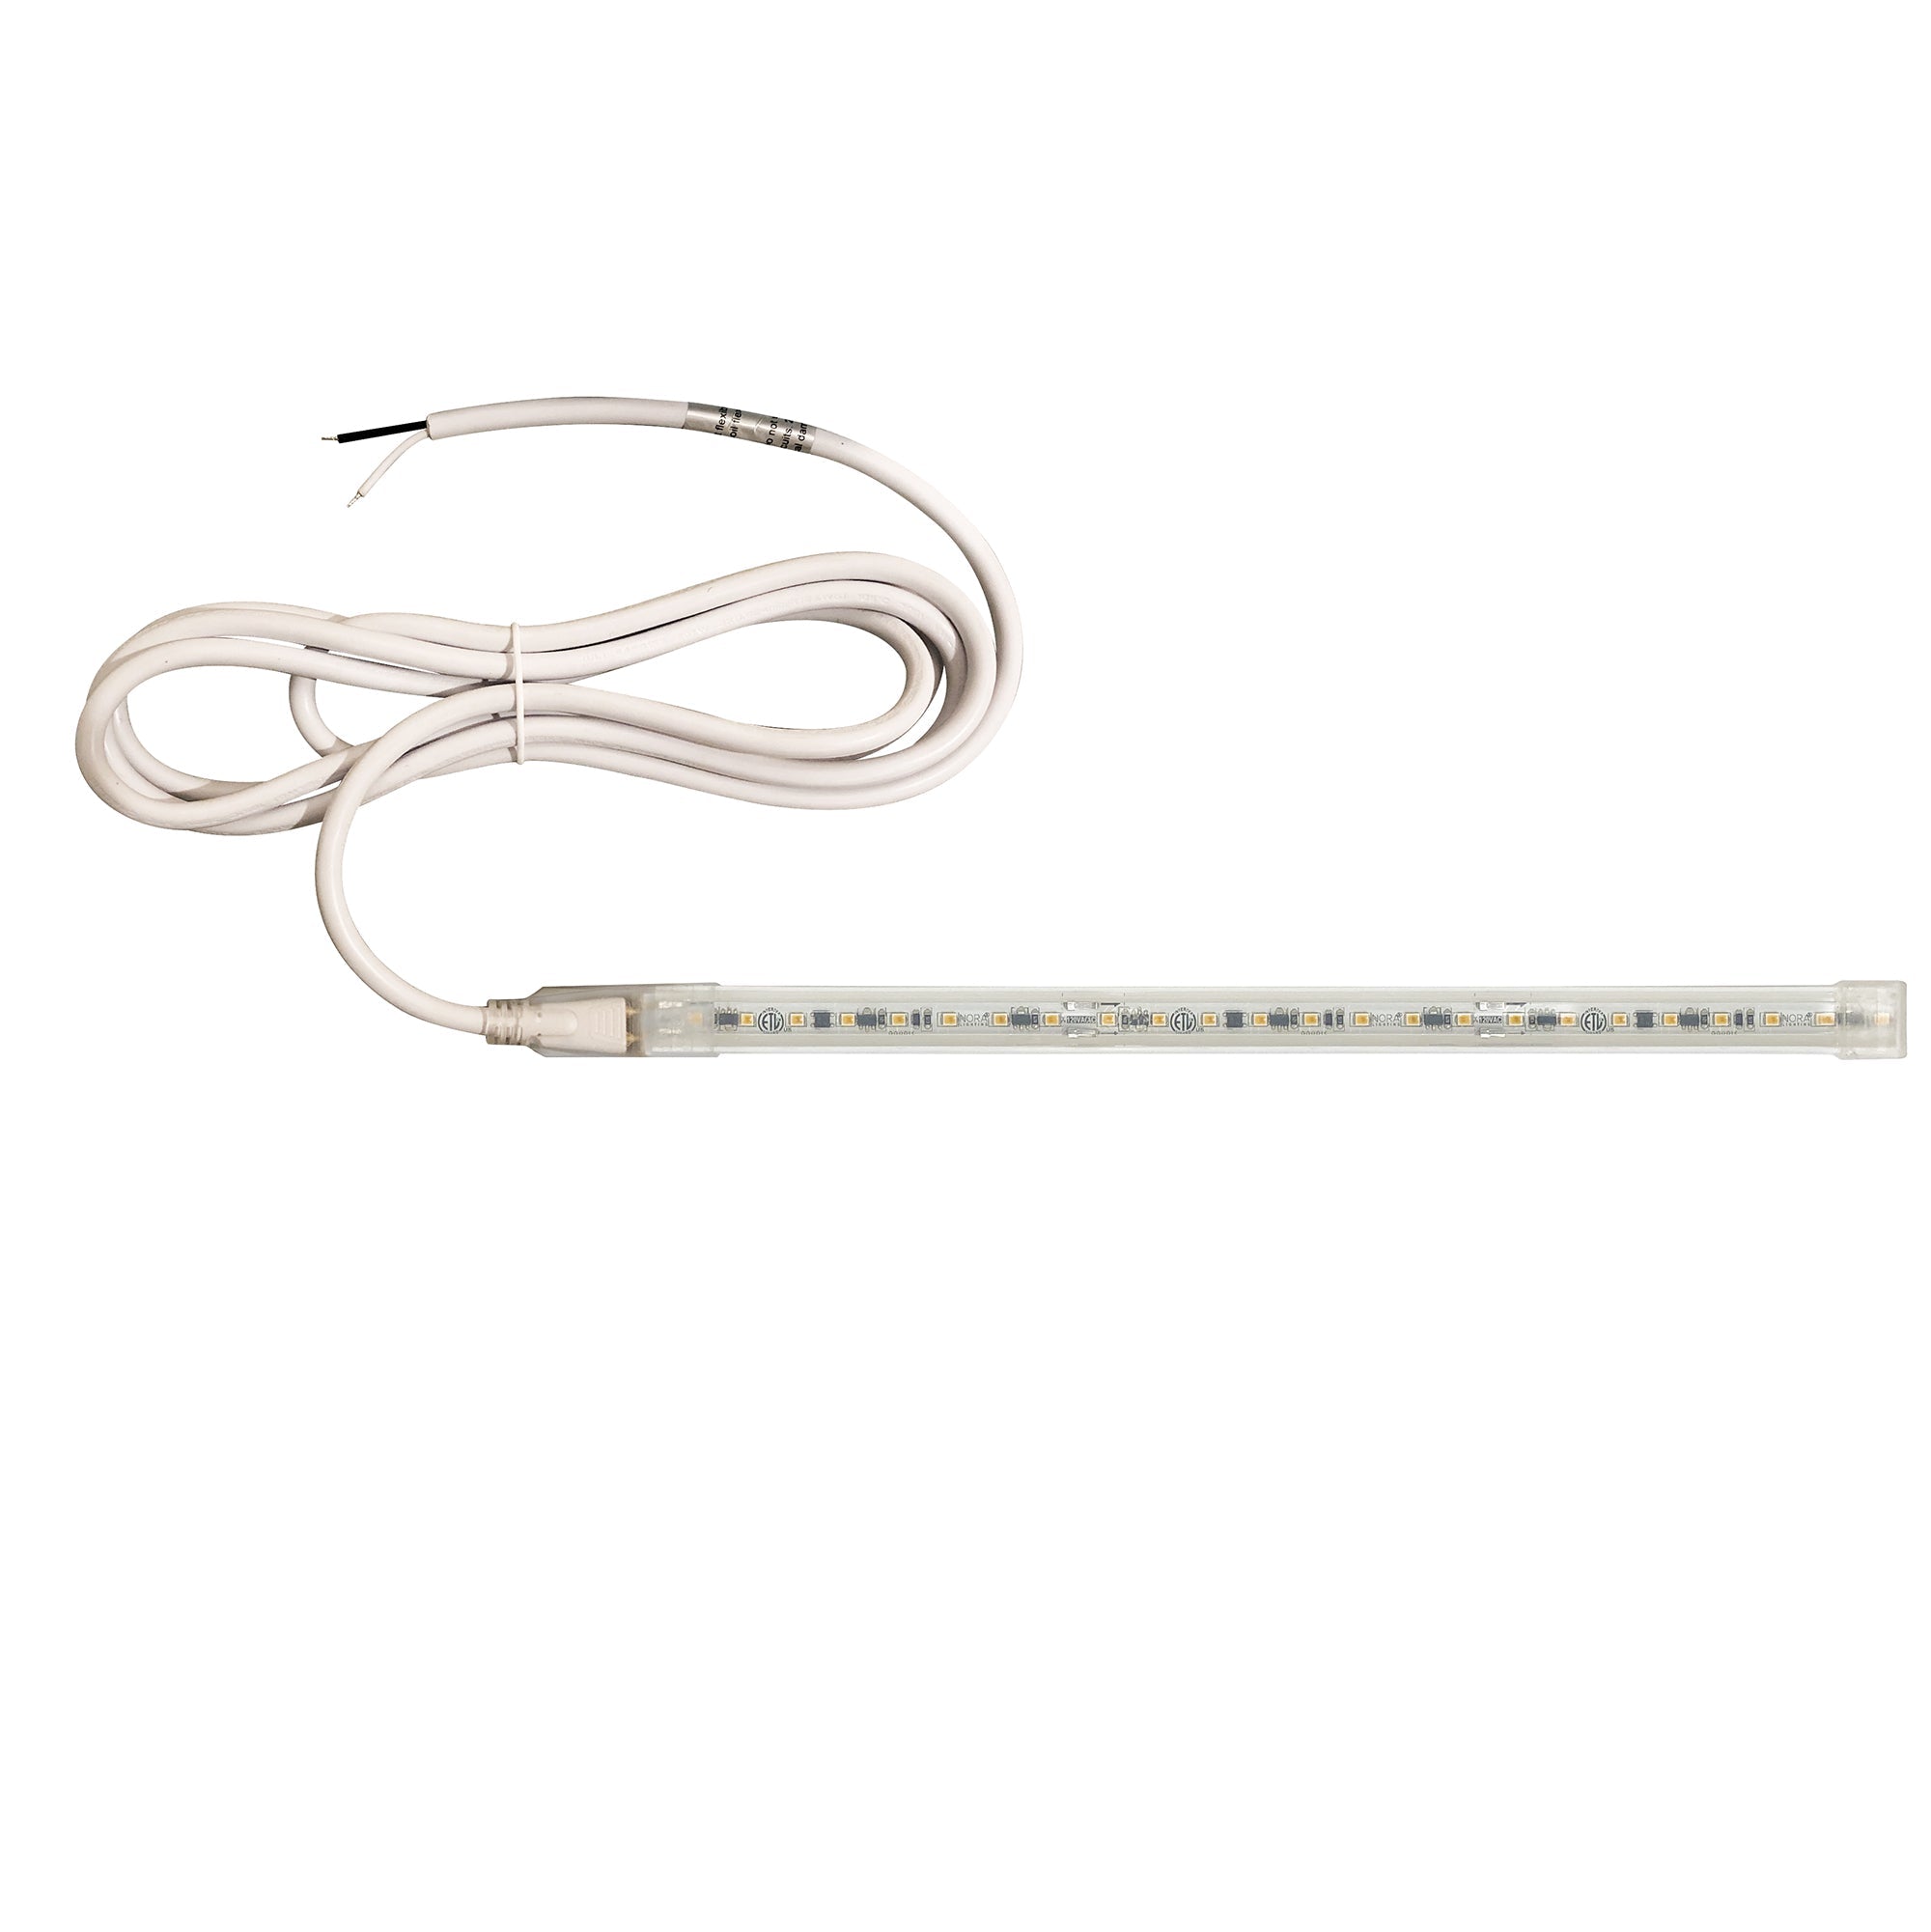 Nora Lighting NUTP13-W46-4-12-930/HW - Accent / Undercabinet - Custom Cut 46-ft, 4-in 120V Continuous LED Tape Light, 330lm / 3.6W per foot, 3000K, w/ Mounting Clips and 8' Hardwired Power Cord